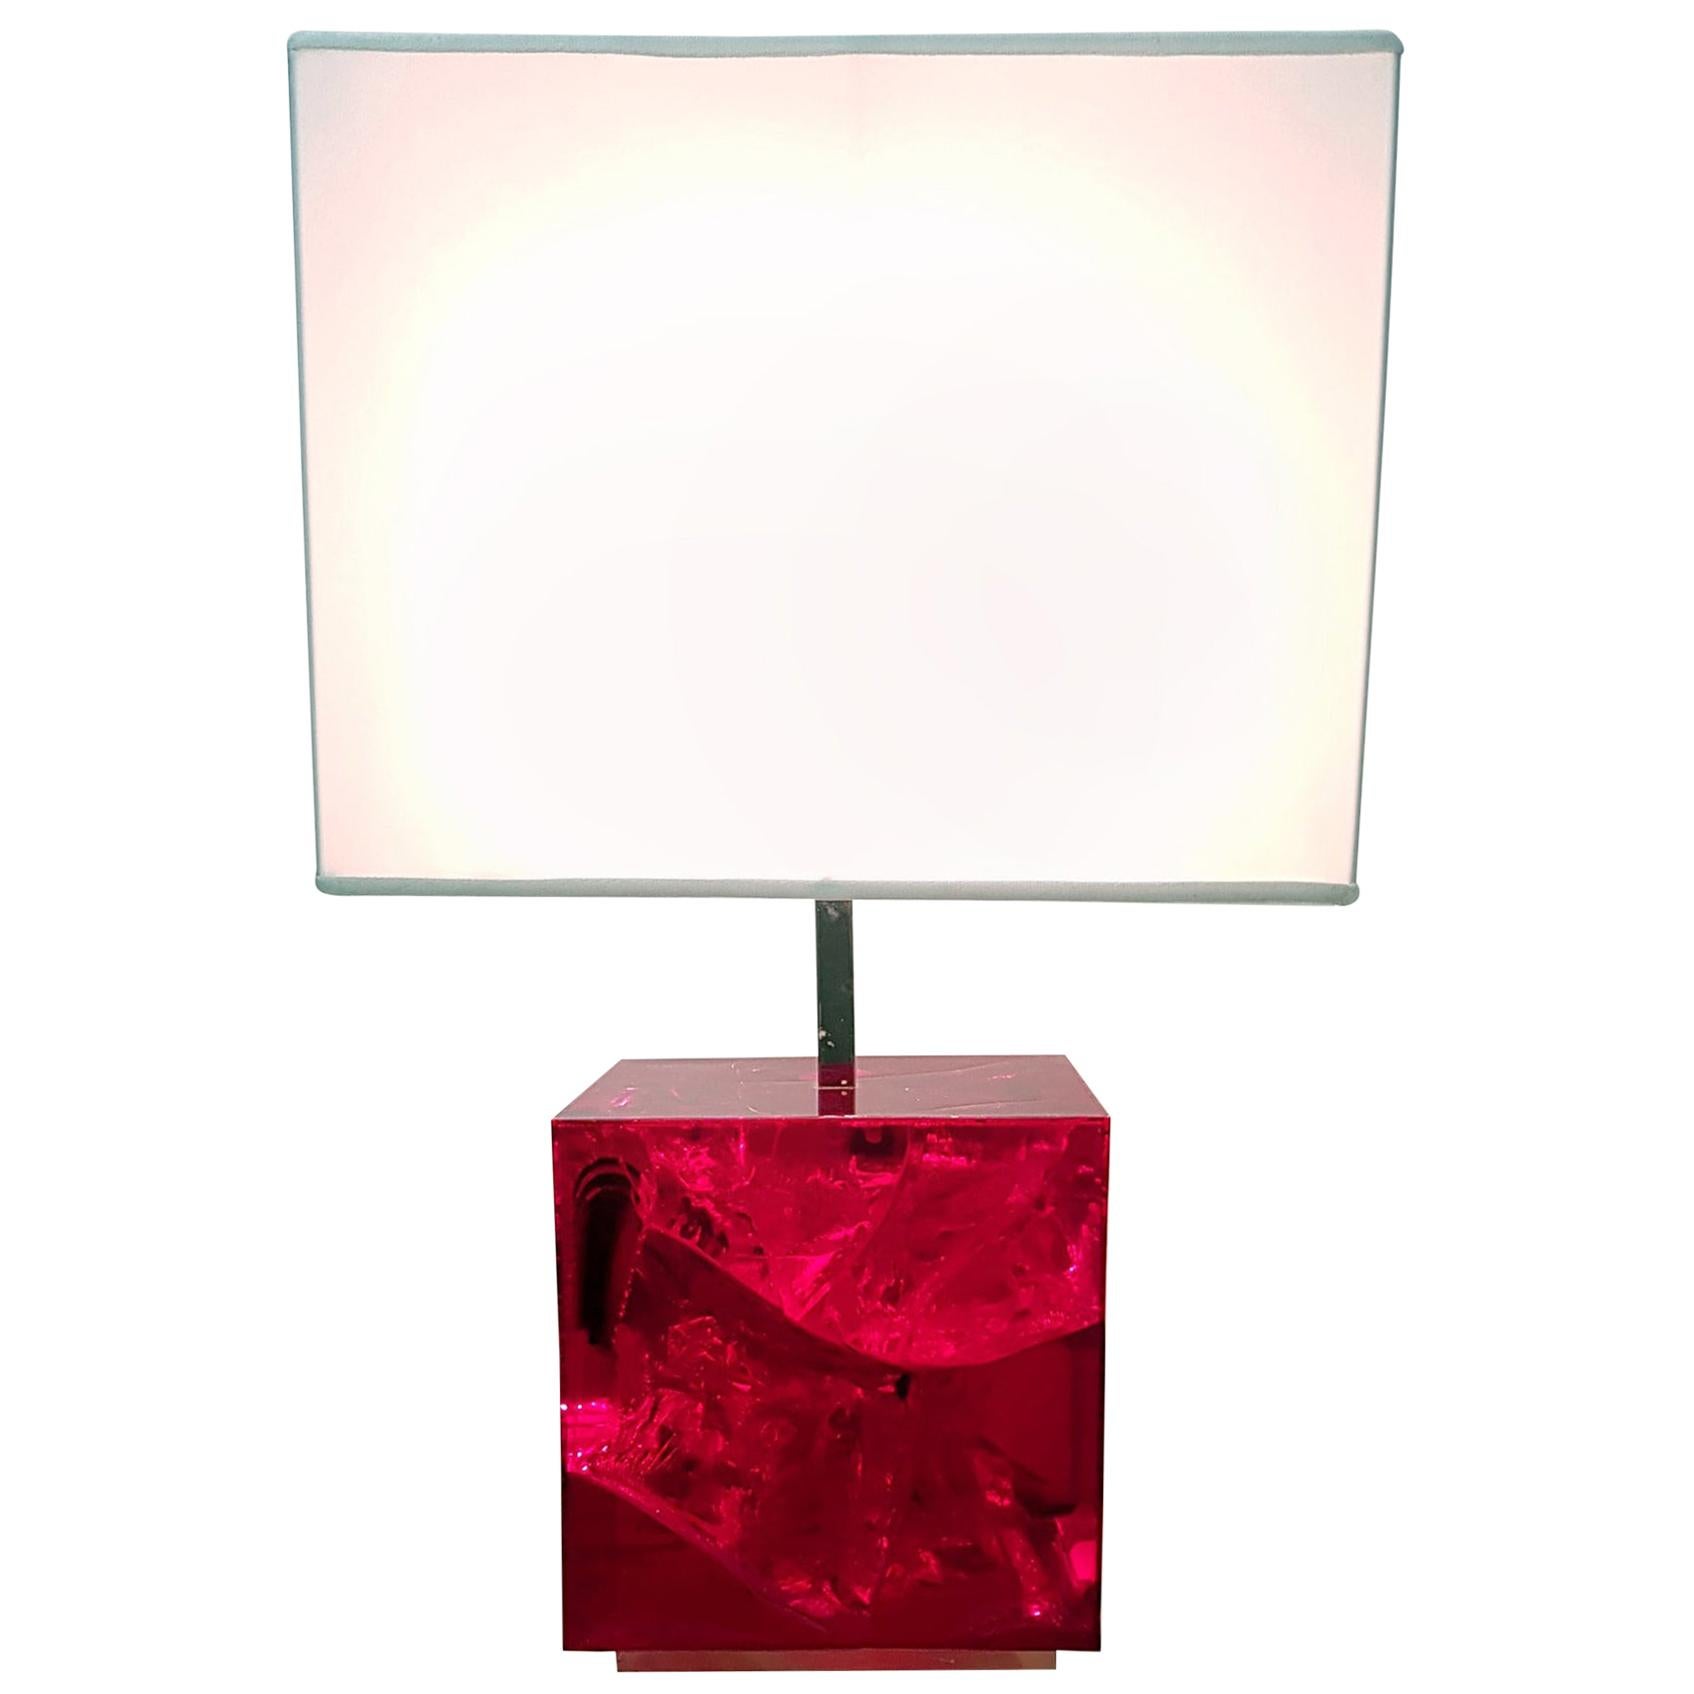 A fractal resin lamp by Pierre Giraudon, France, with a ruby red colored base and also with a new square handmade lampshade. In excellent condition without chipping or cracks.